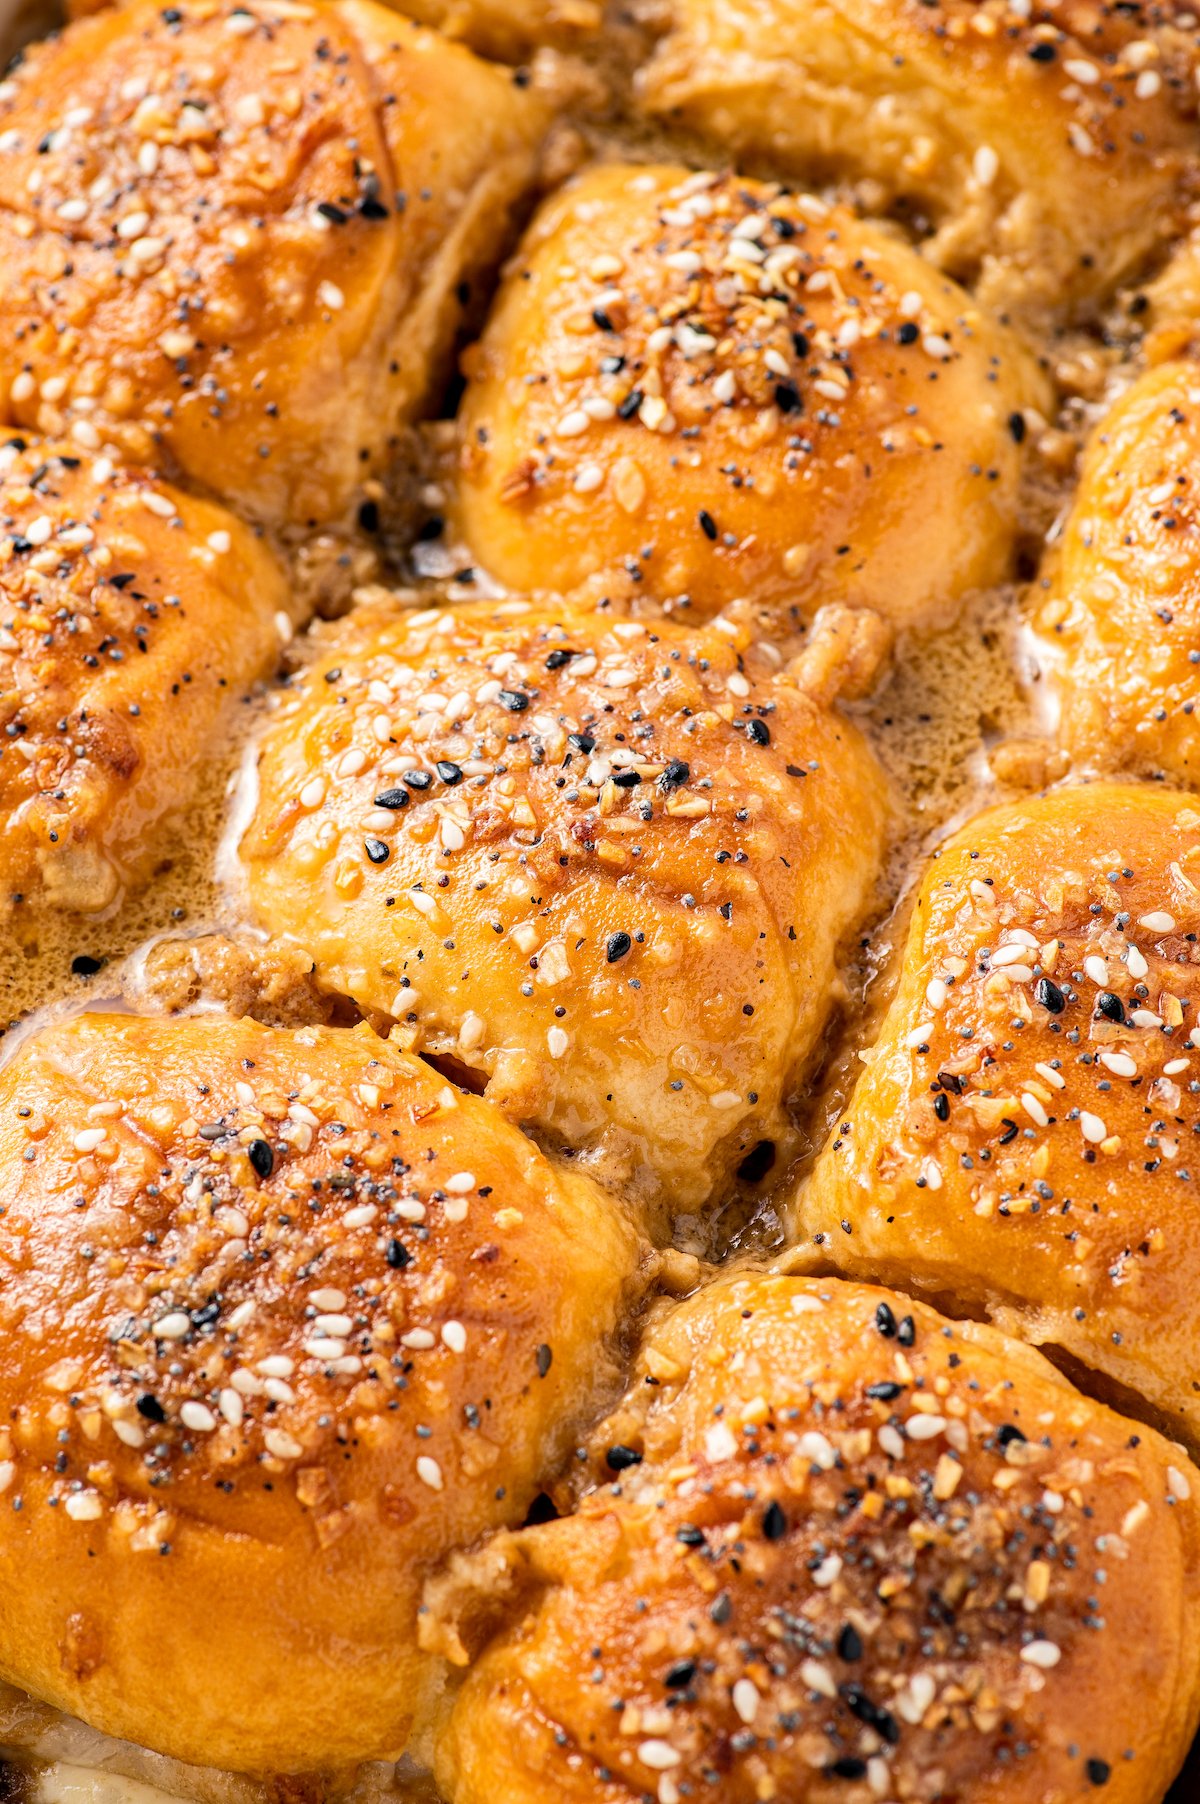 A pan of baked turkey sliders topped with a buttery sauce and everything bagel seasoning.